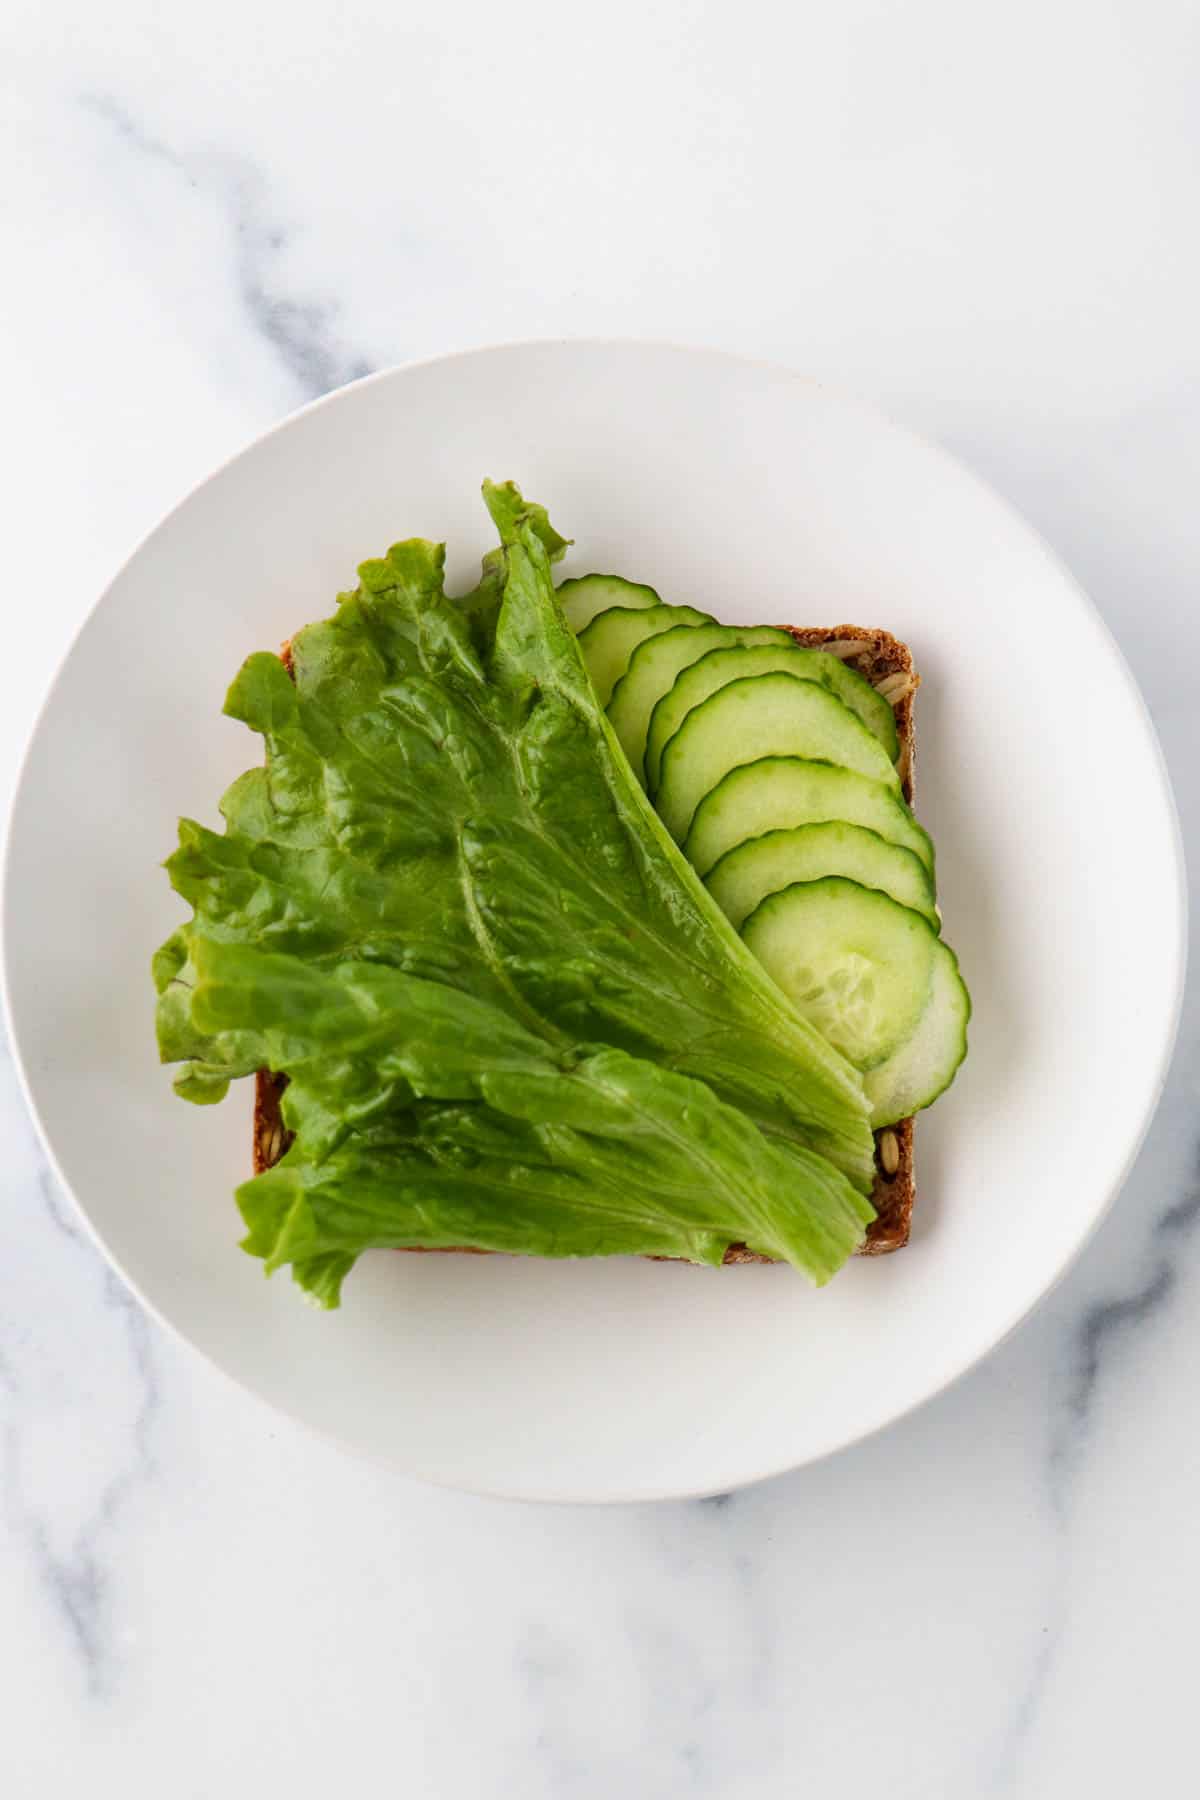 Lettuce and cucumber slices on a slice of rye bread.